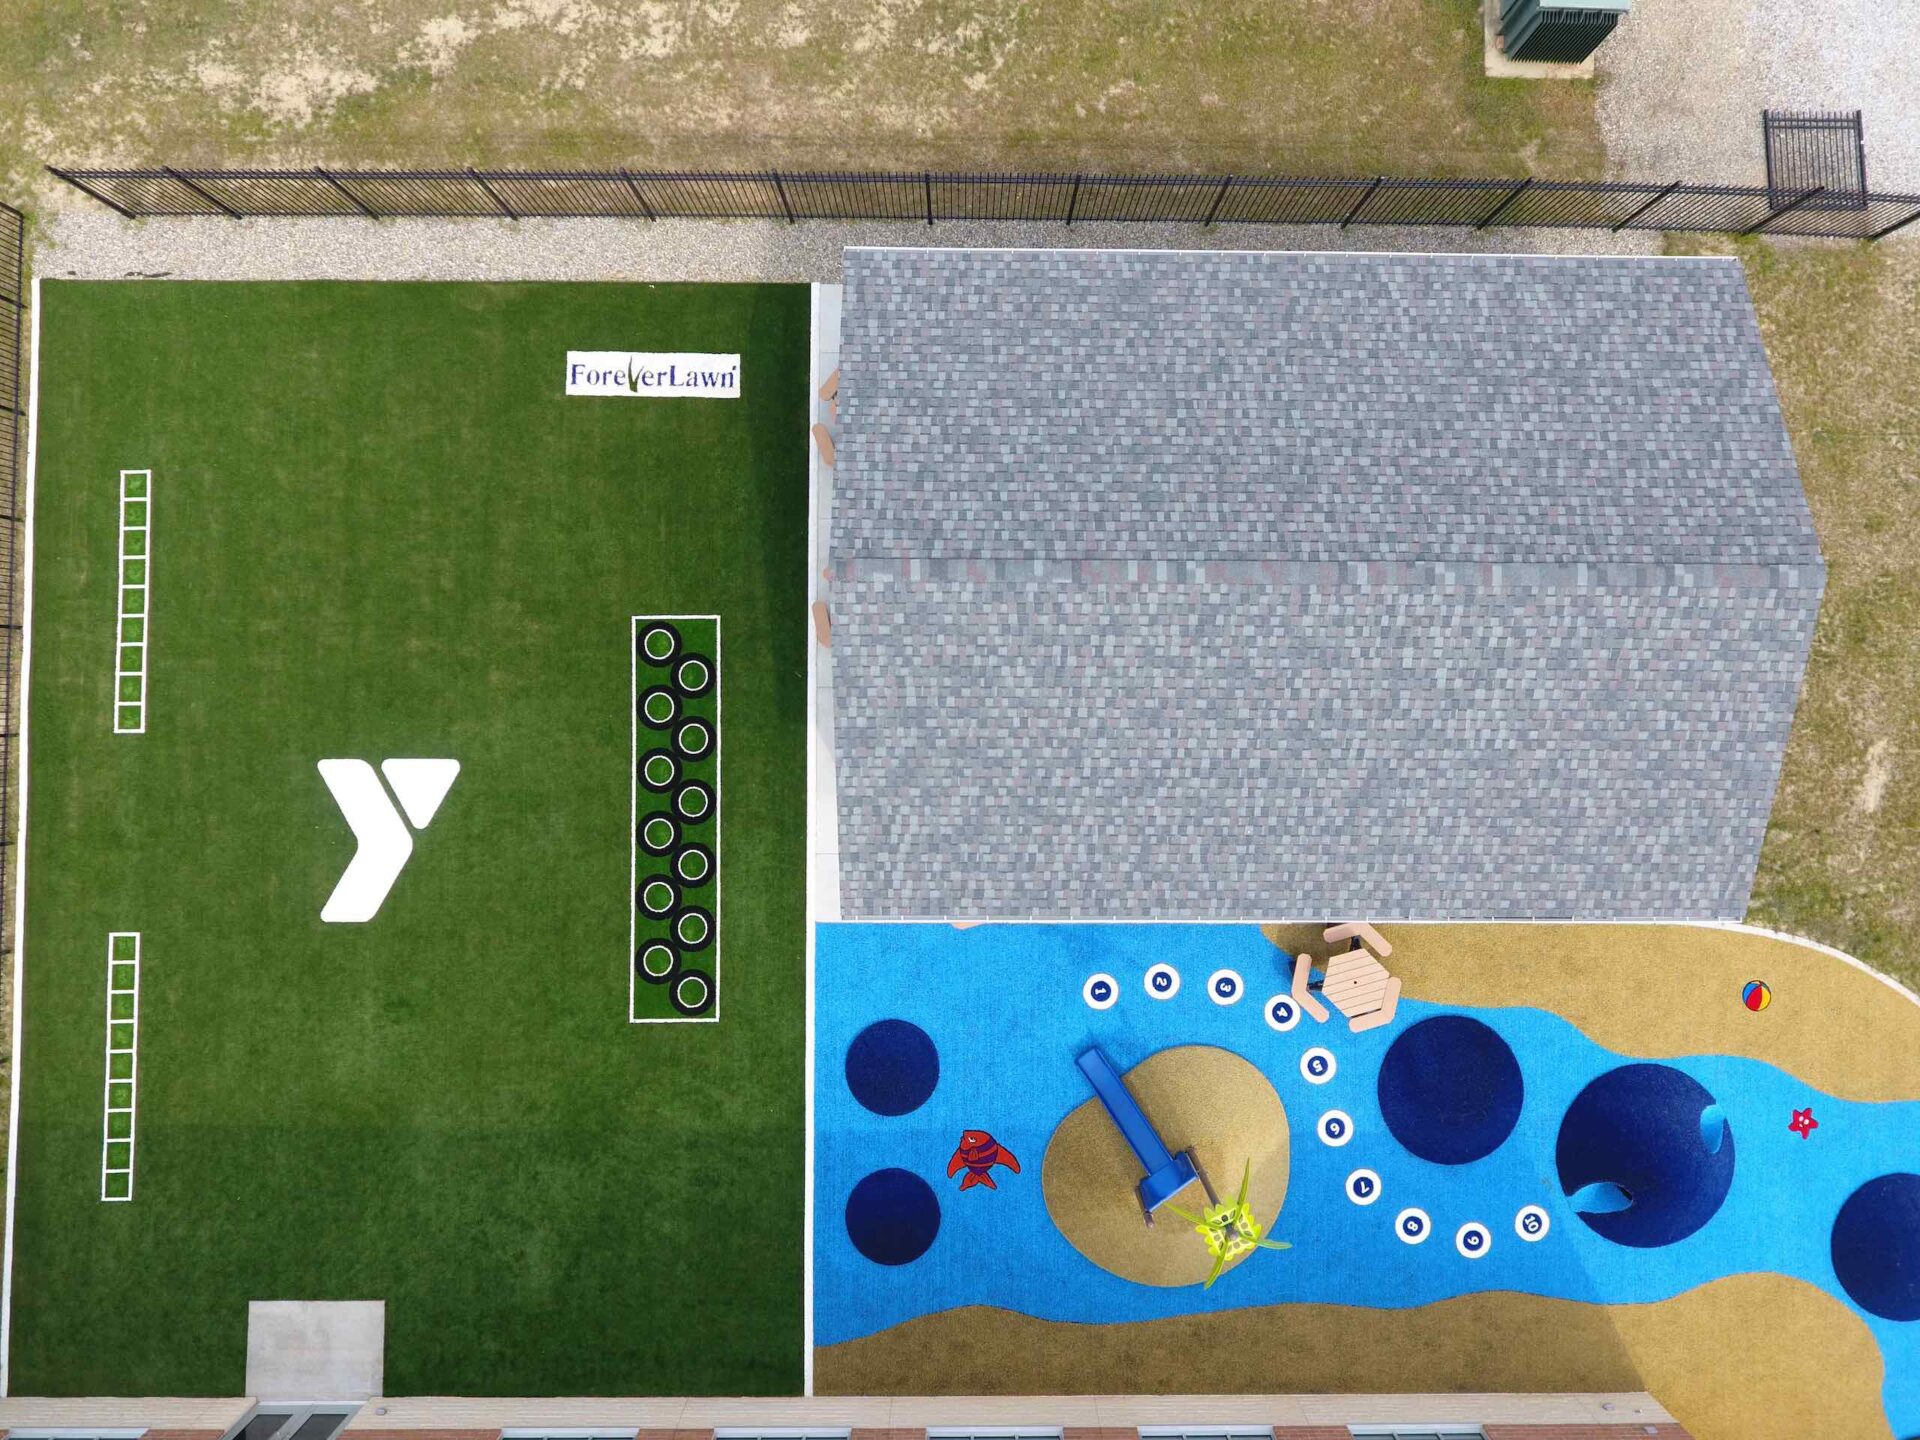 An aerial view of a playground with artificial grass, colorful play areas, a blue splash pad, and a shaded bench next to a building.